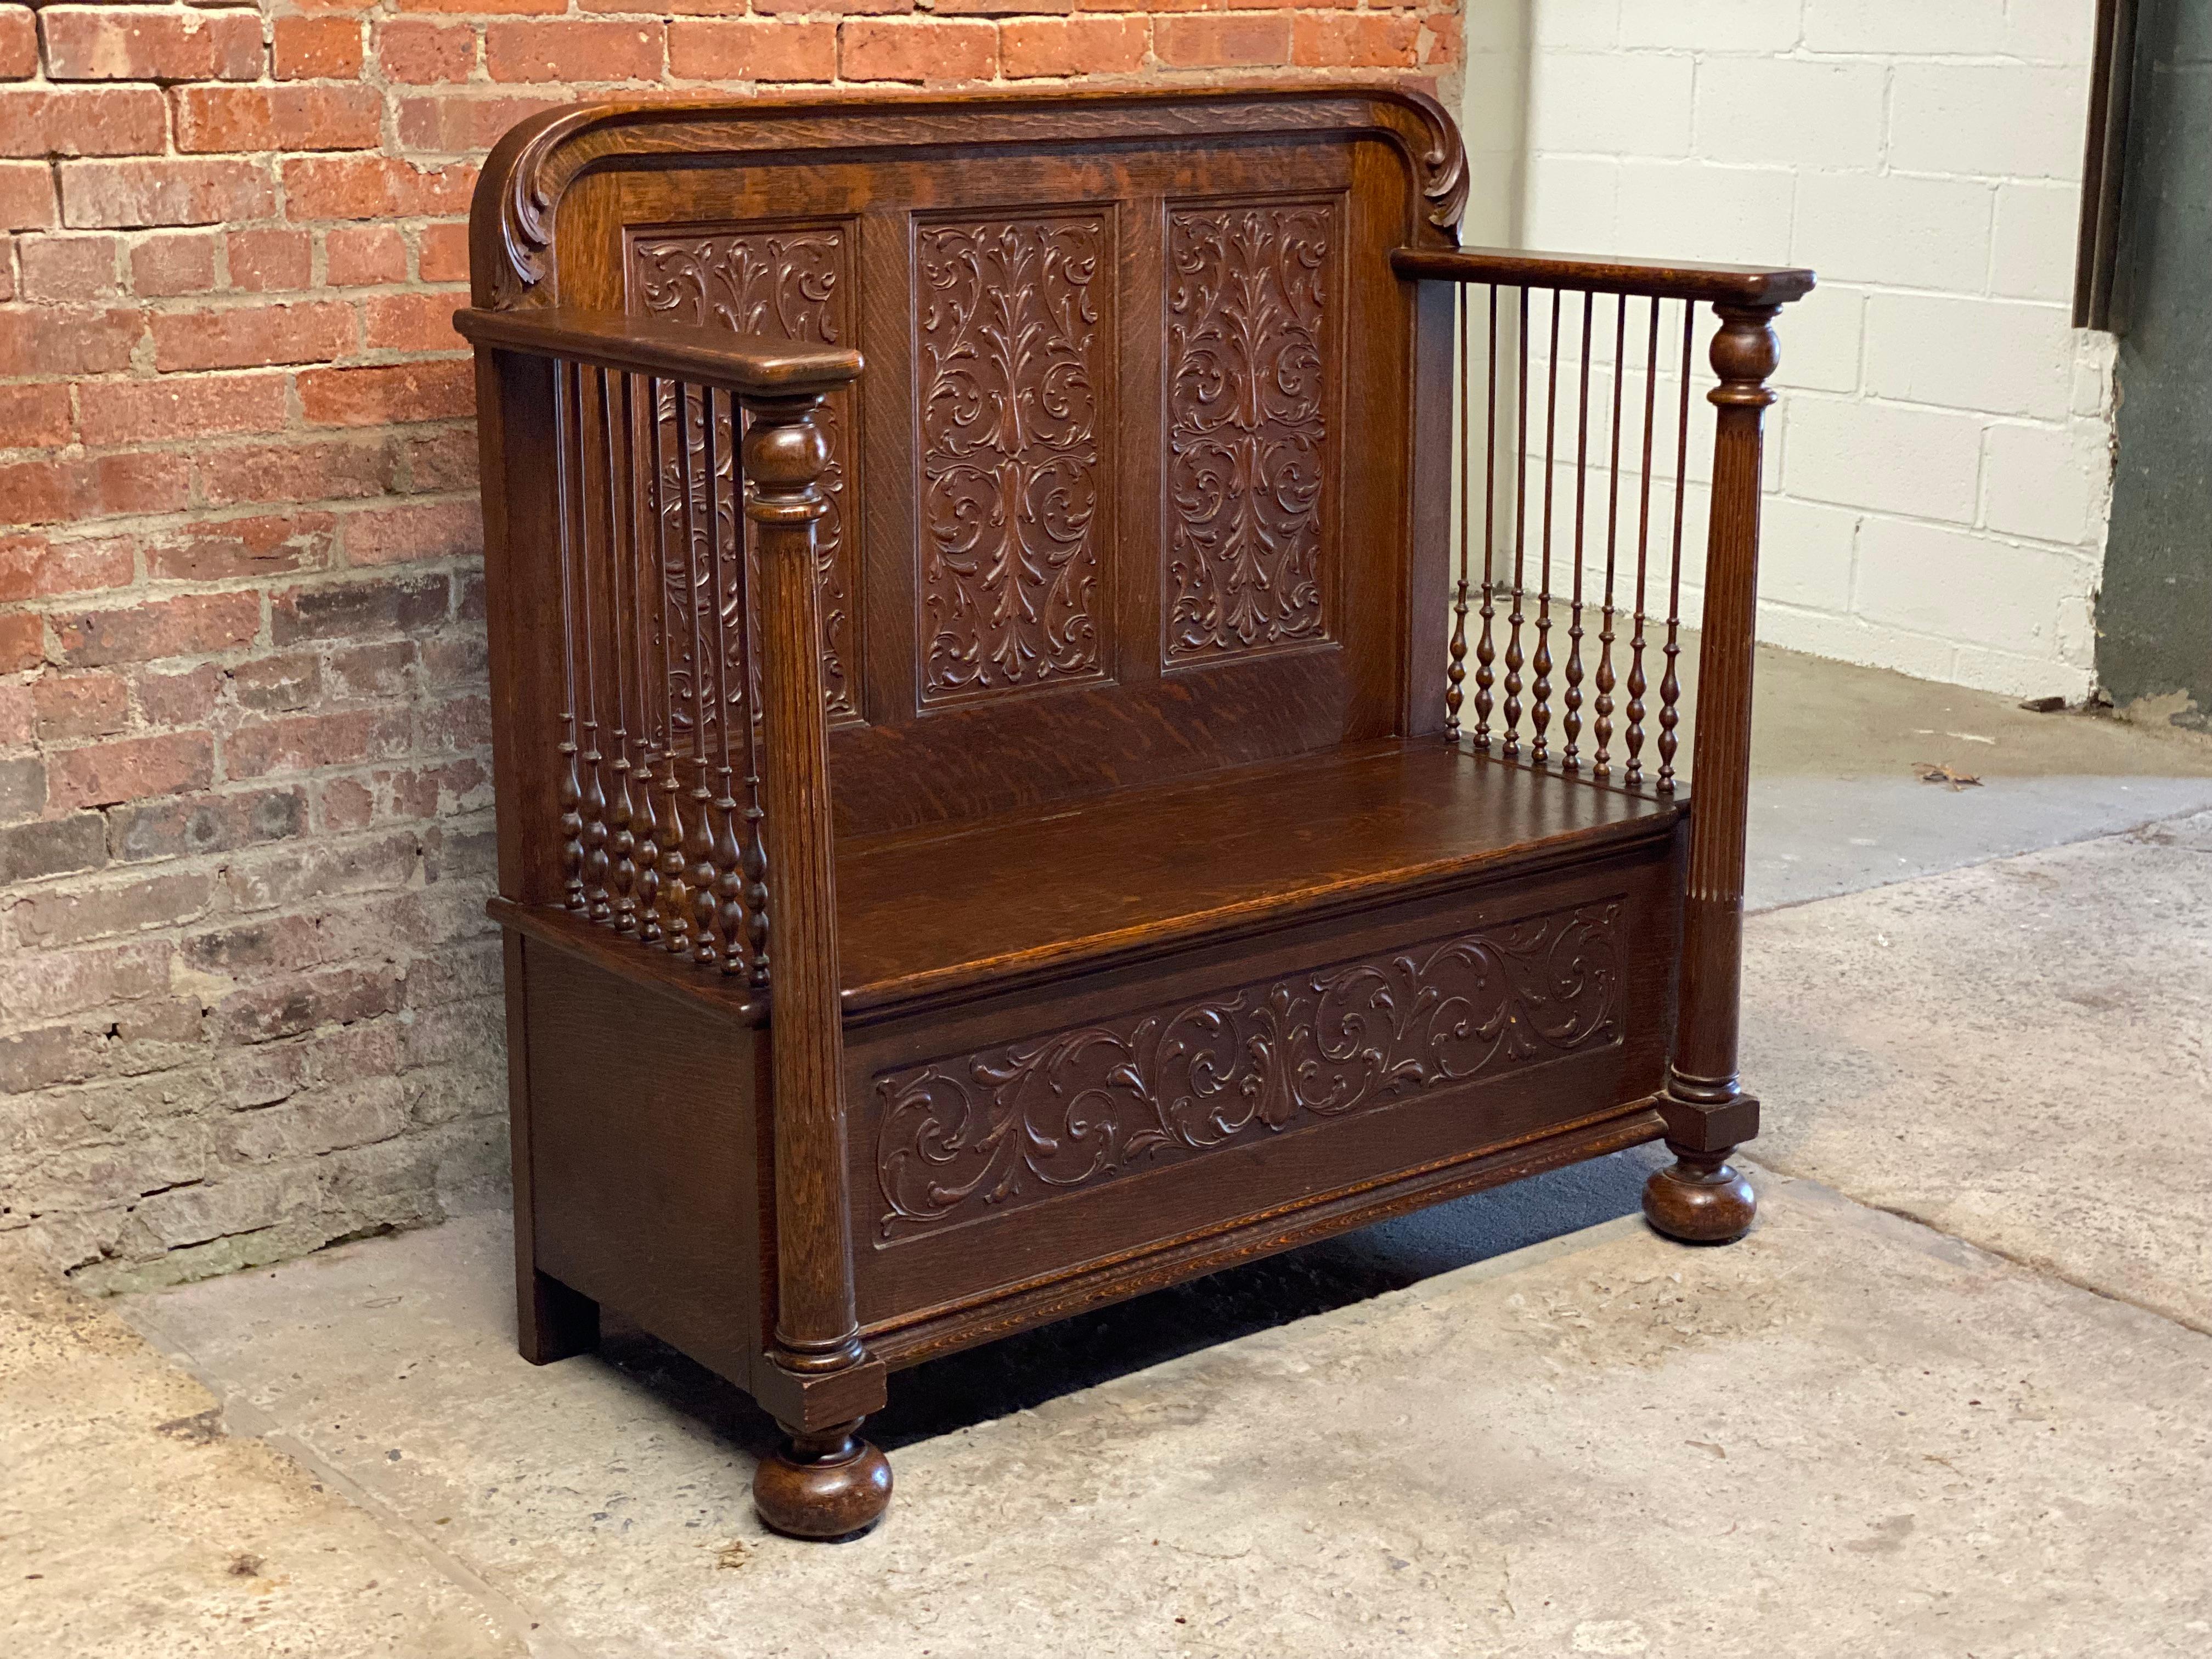 Amazing Victorian quarter sawn and carved oak deacon's bench with roomy under seat storage. Featuring carved leaf and scroll relief recessed panels with high paddle arms, spindle gallery sides, fluted columns and bun feet. Circa 1870-1890.